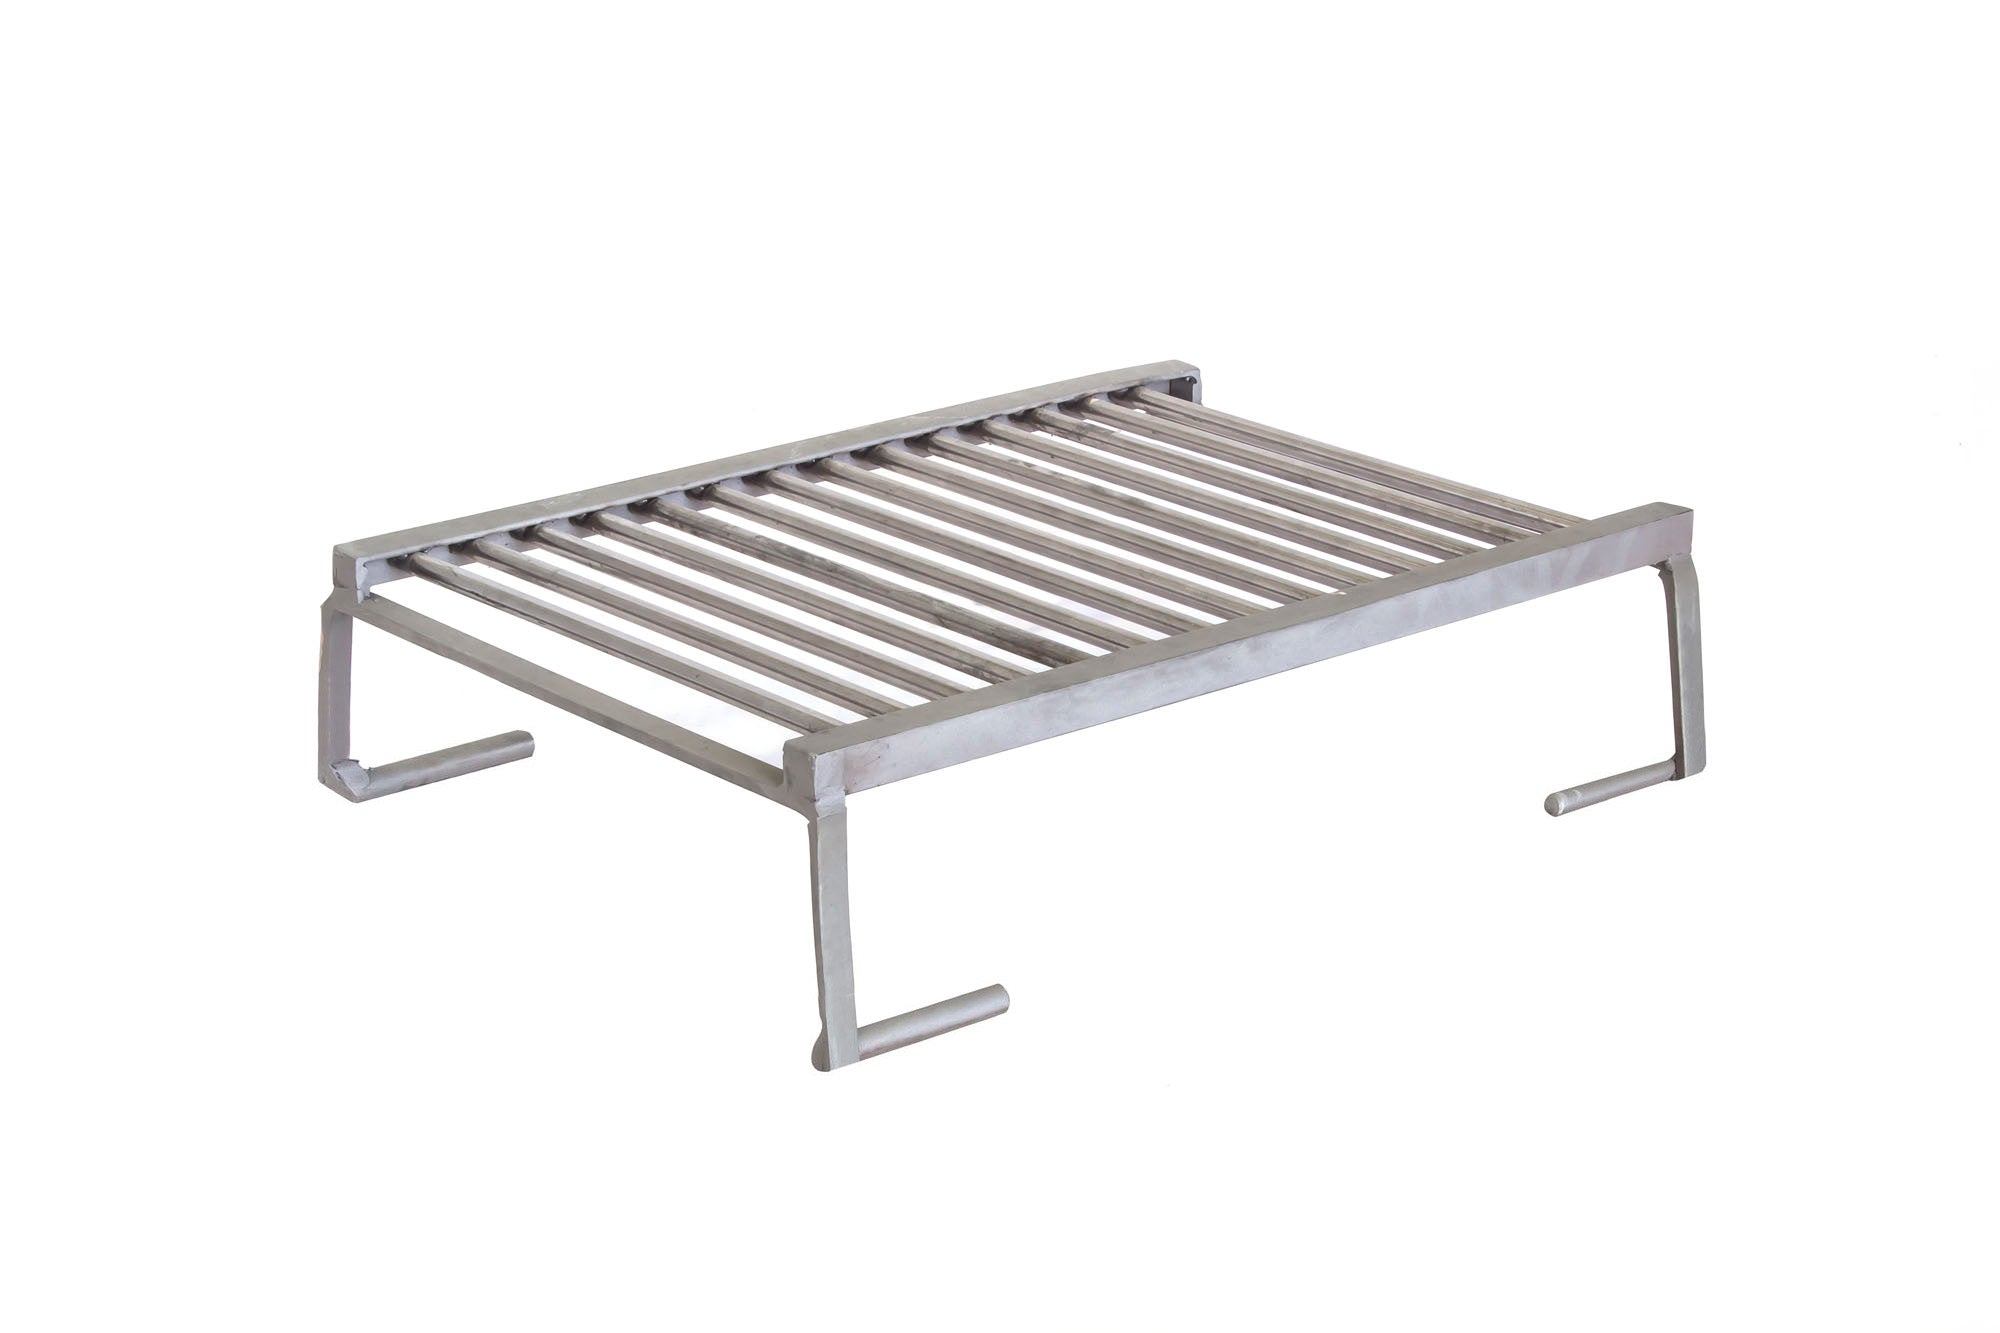 Stainless Steel Grill for Pizza Oven – Forno Piombo